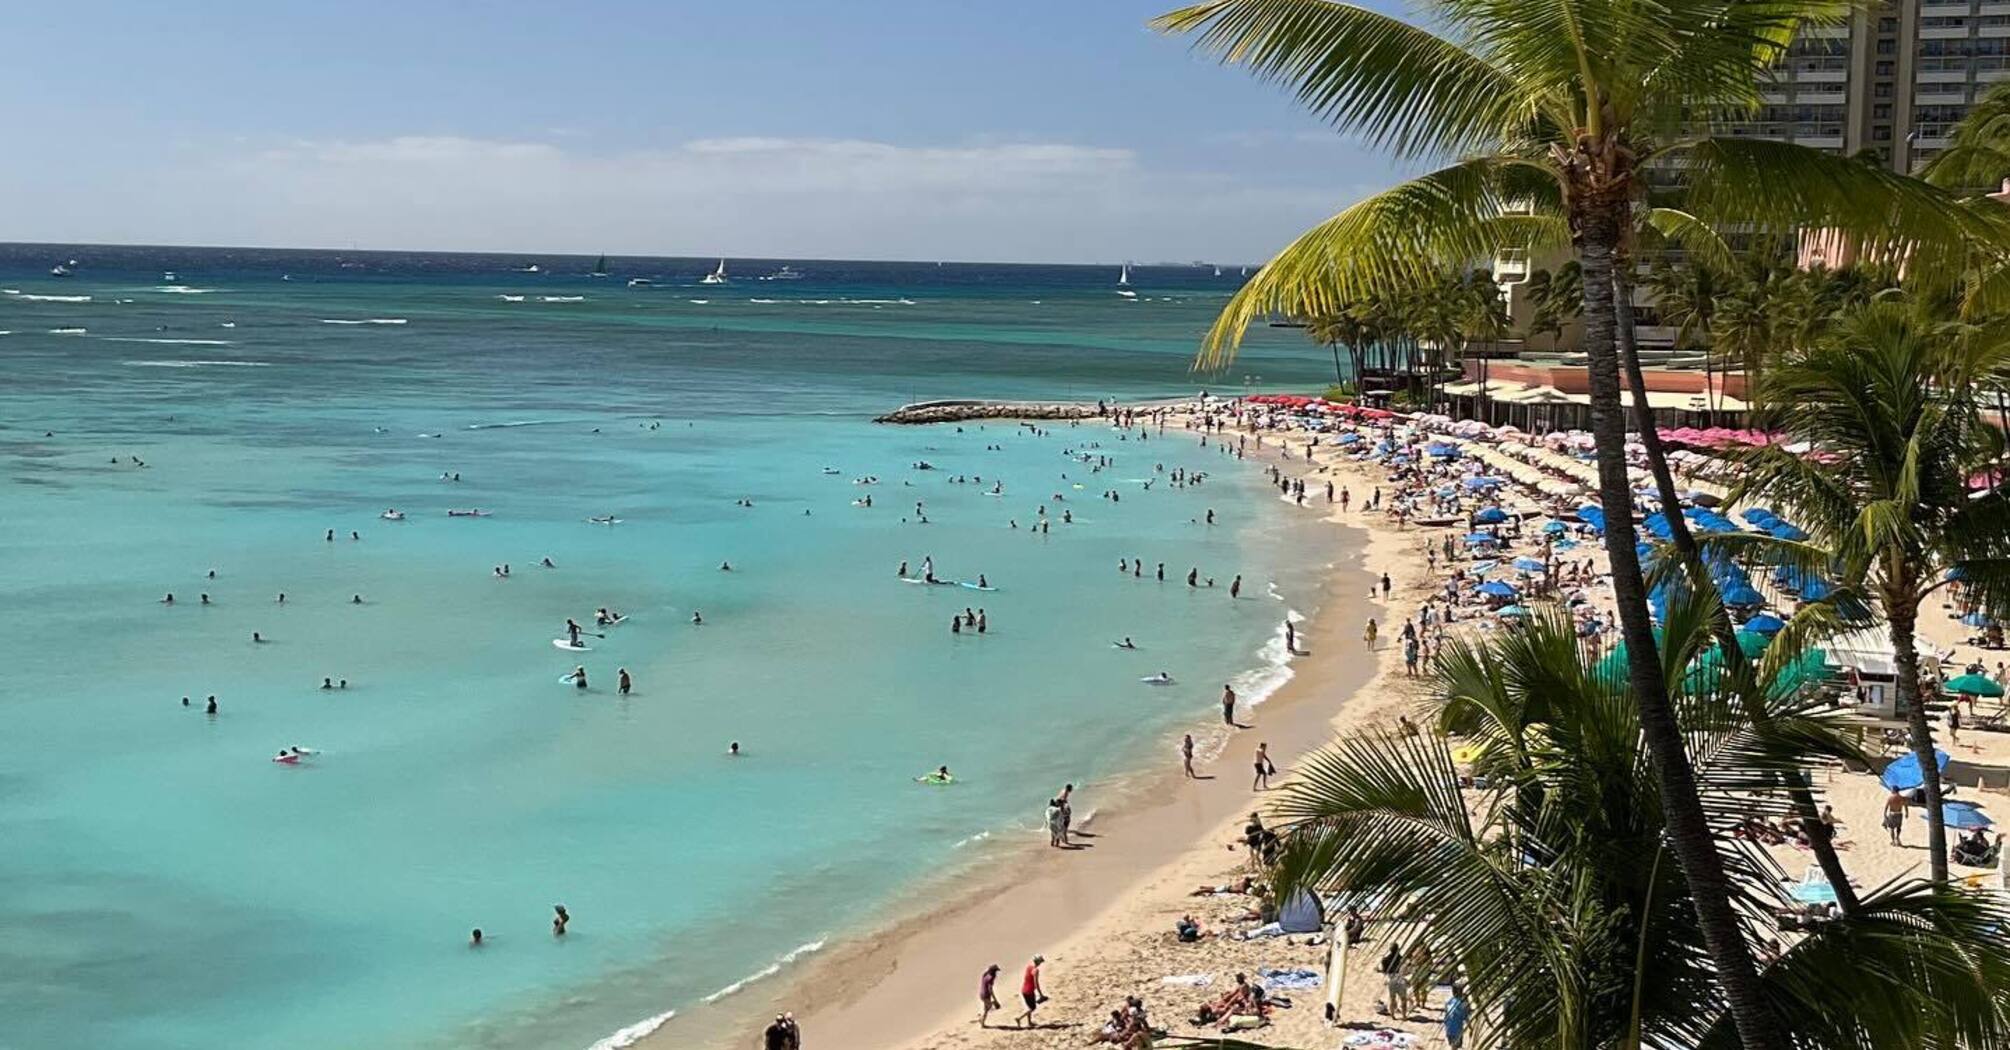 Got into trouble: how British tourists demanded compensation for their canceled vacation in Hawaii